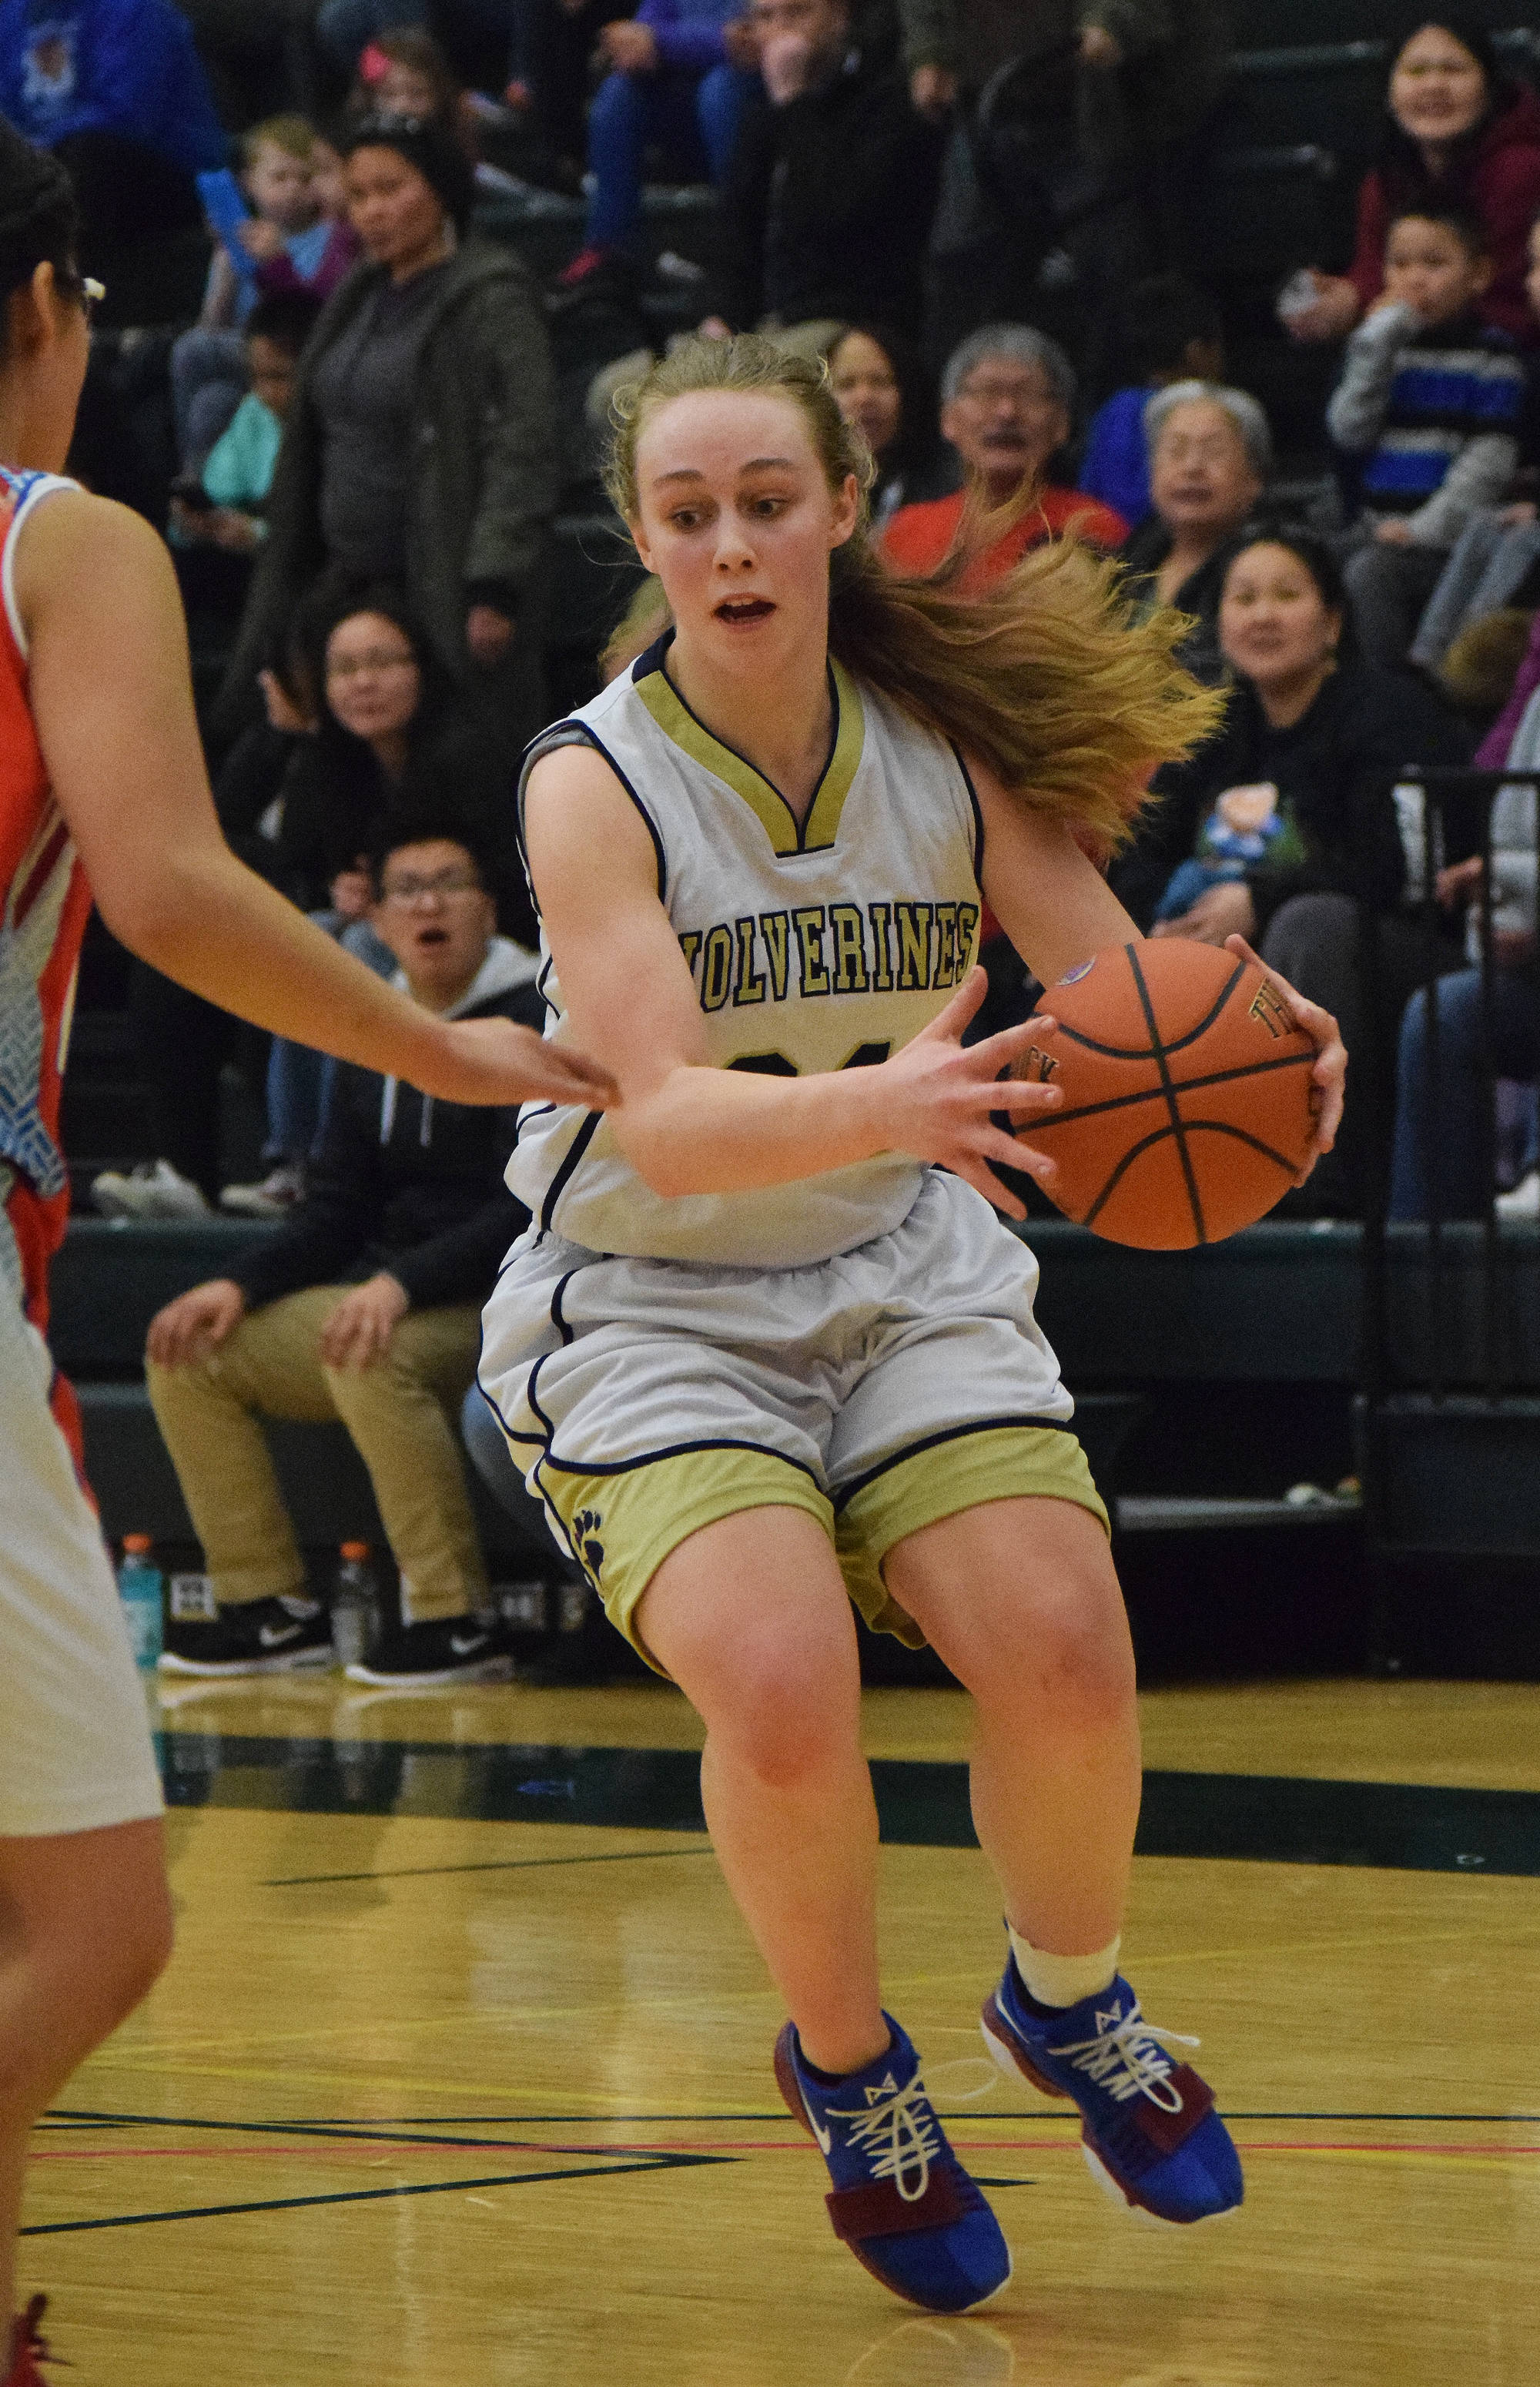 Ninilchik’s Isabella Koch dribbles past the top of the key Friday in a Class 1A state tournament consolation game against Toksook Bay at the Alaska Airlines Center in Anchorage. (Photo by Joey Klecka/Peninsula Clarion)